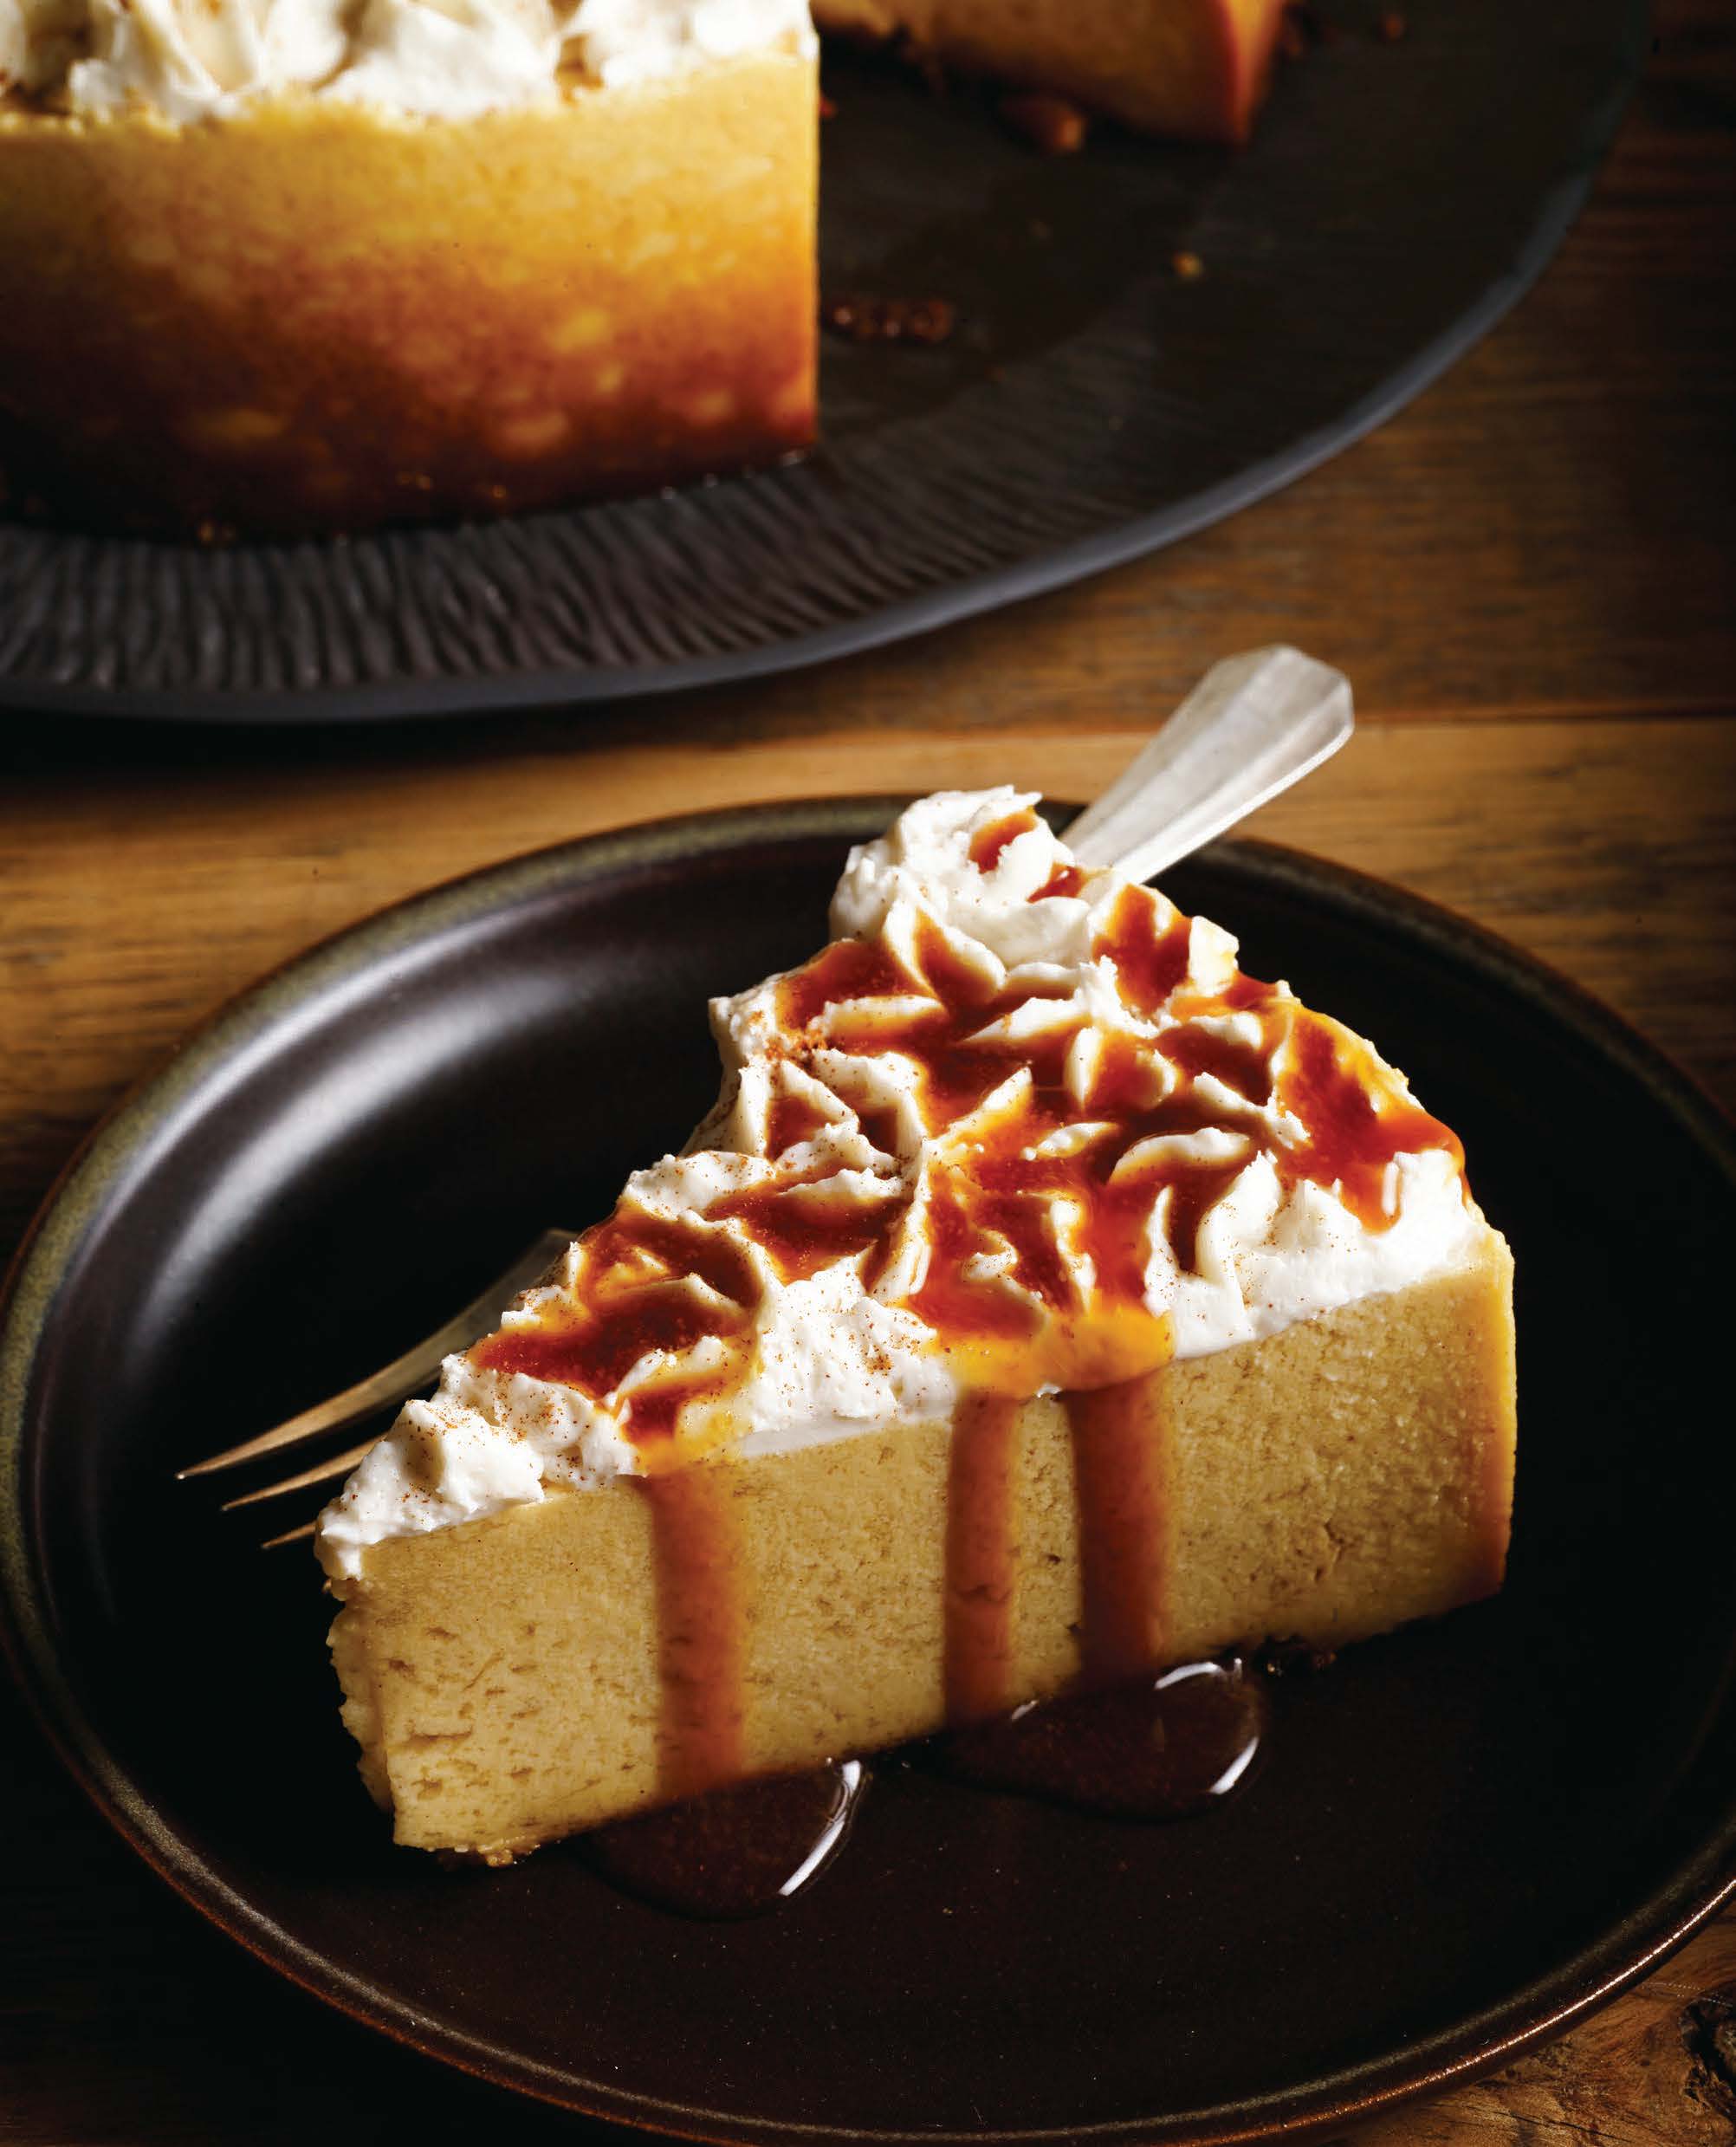 Pumpkin Cheesecake with Apple Cider Reduction by Candle Cafe